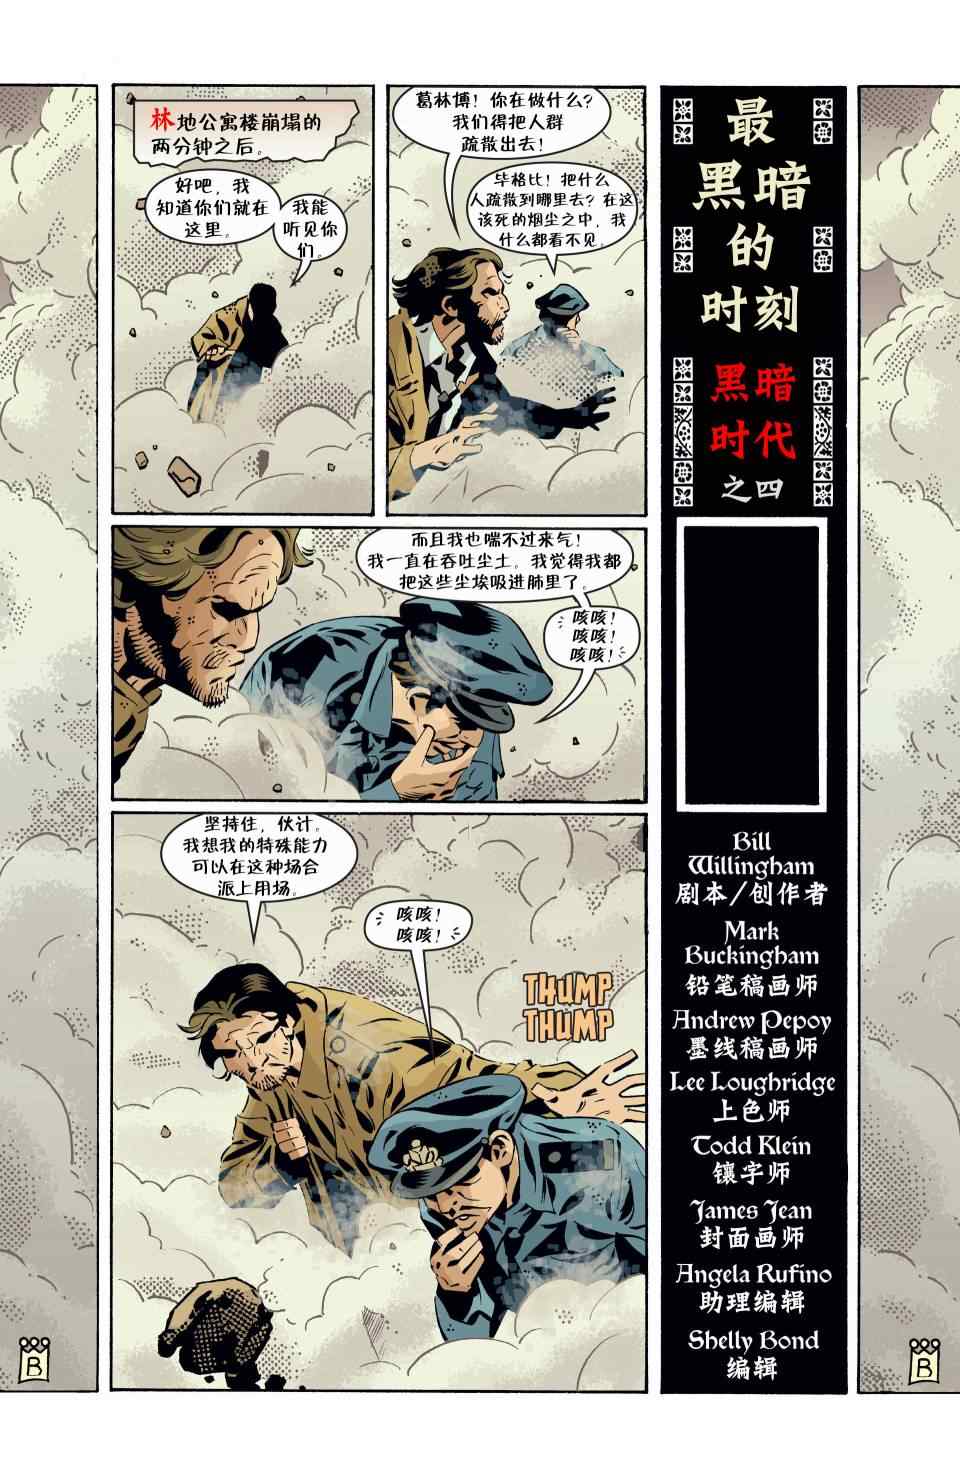 《Fables》漫画 080卷